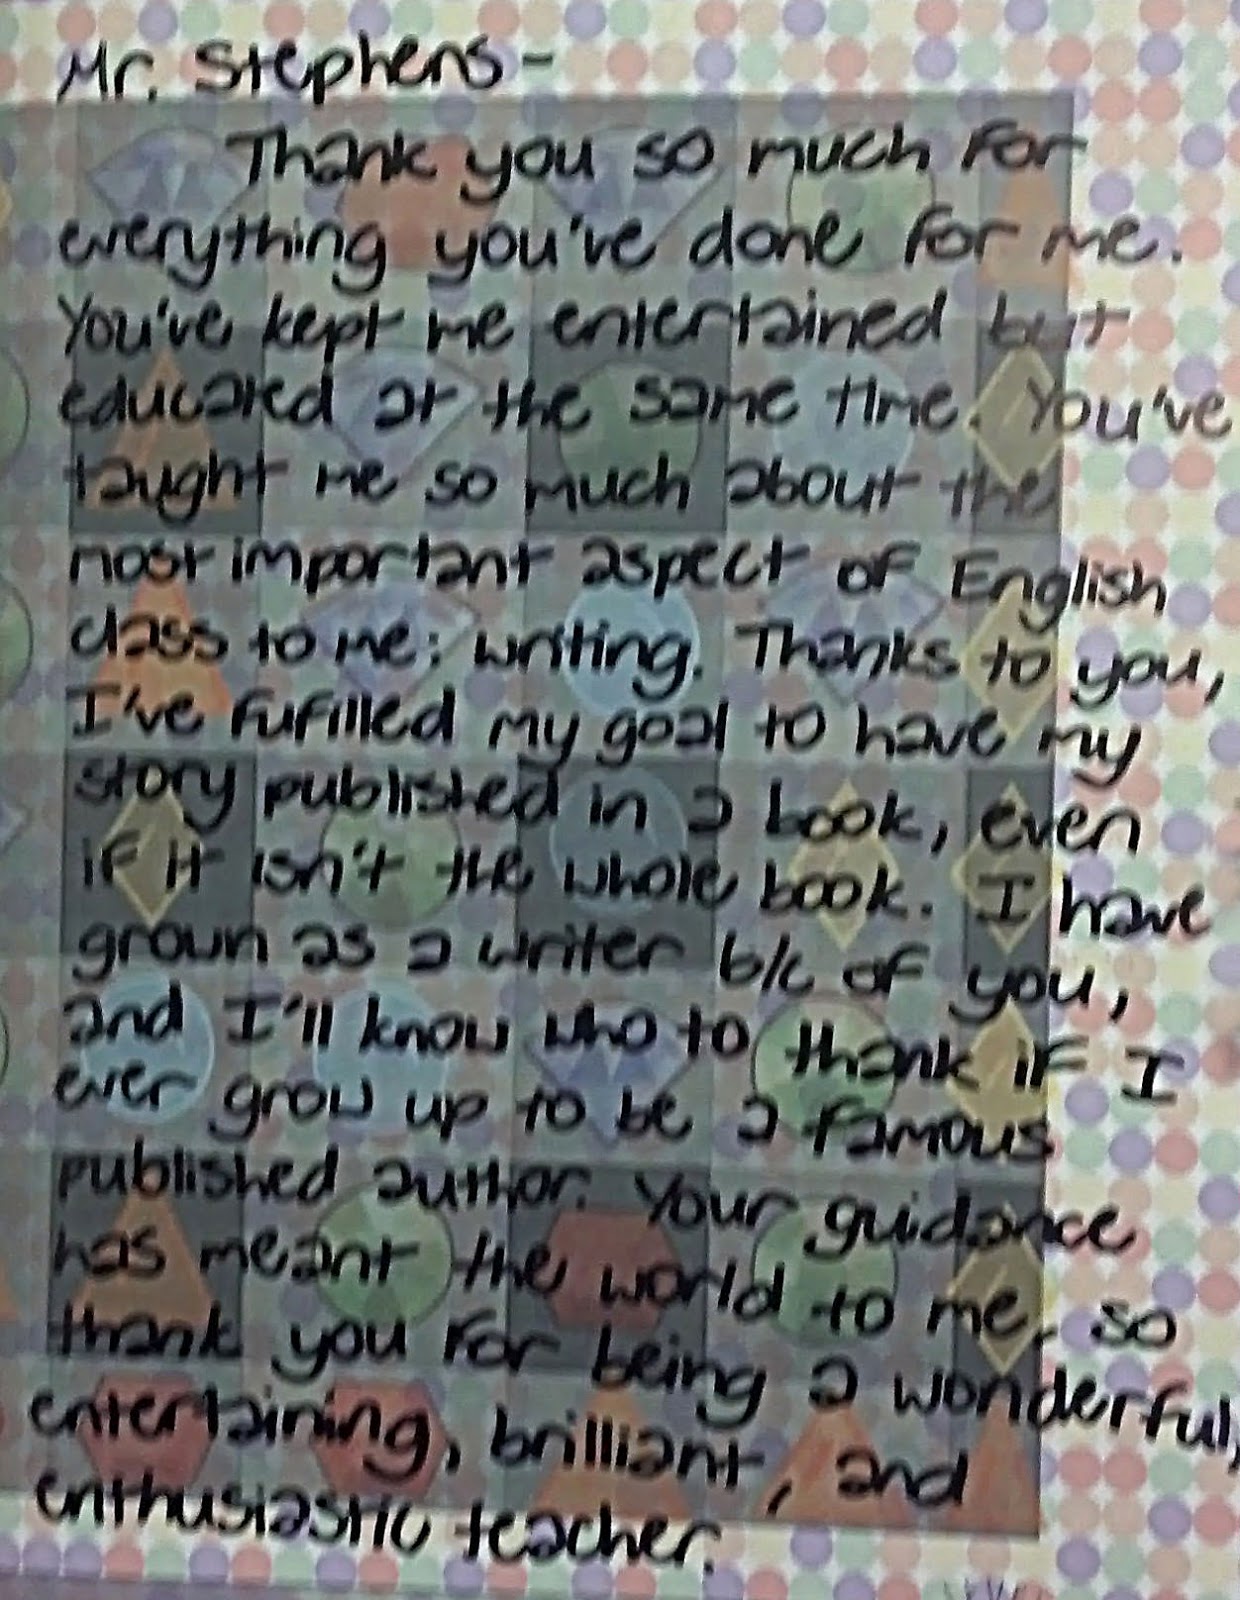 Yearbook Memento Student Comment (Created for Learning)